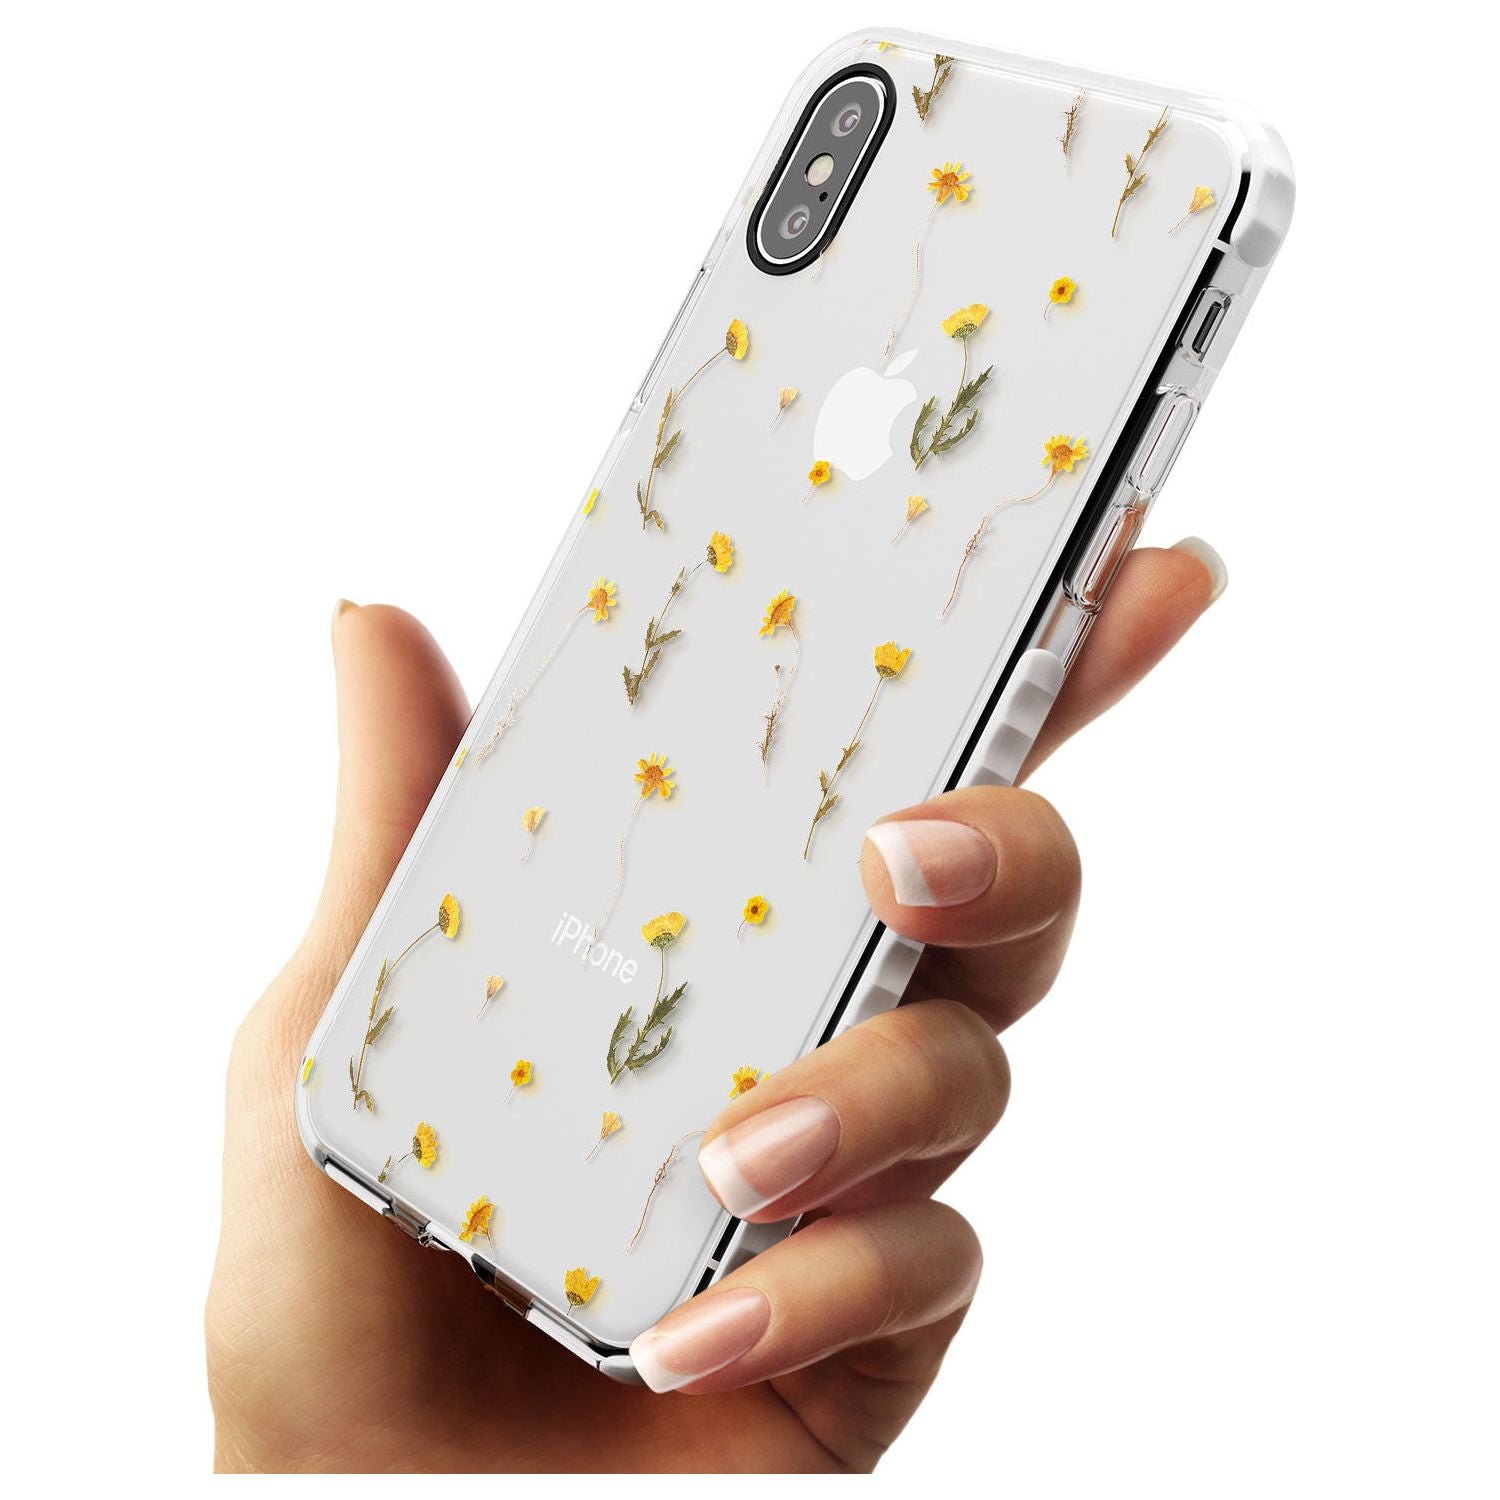 Mixed Yellow Flowers - Dried Flower-Inspired Impact Phone Case for iPhone X XS Max XR